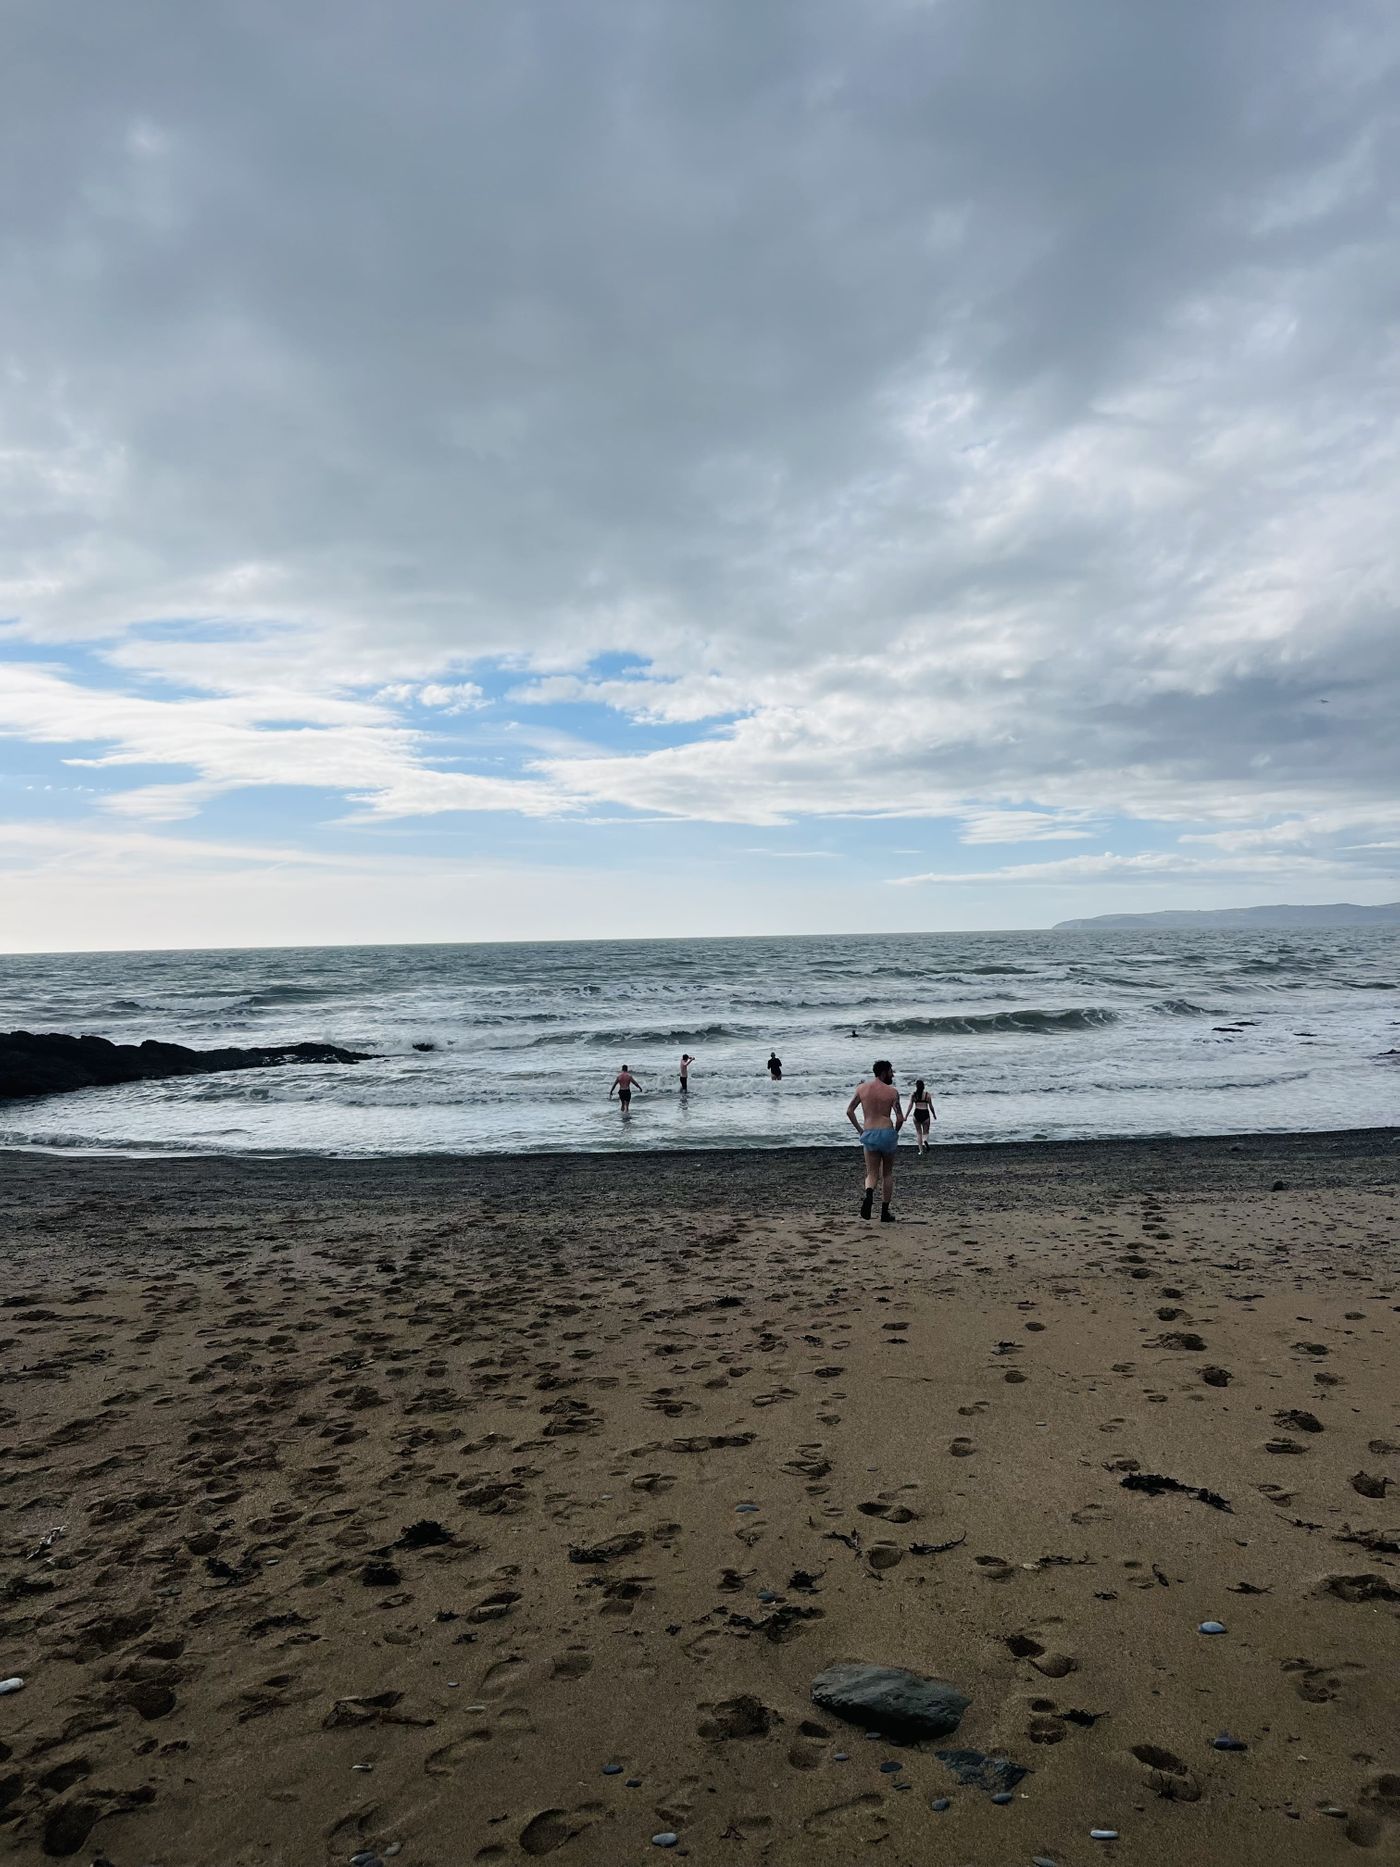 Really enjoyed some hot & cold action with my family over the long weekend. The Irish Sea 🌊 was at 7 degrees on the day 🥶